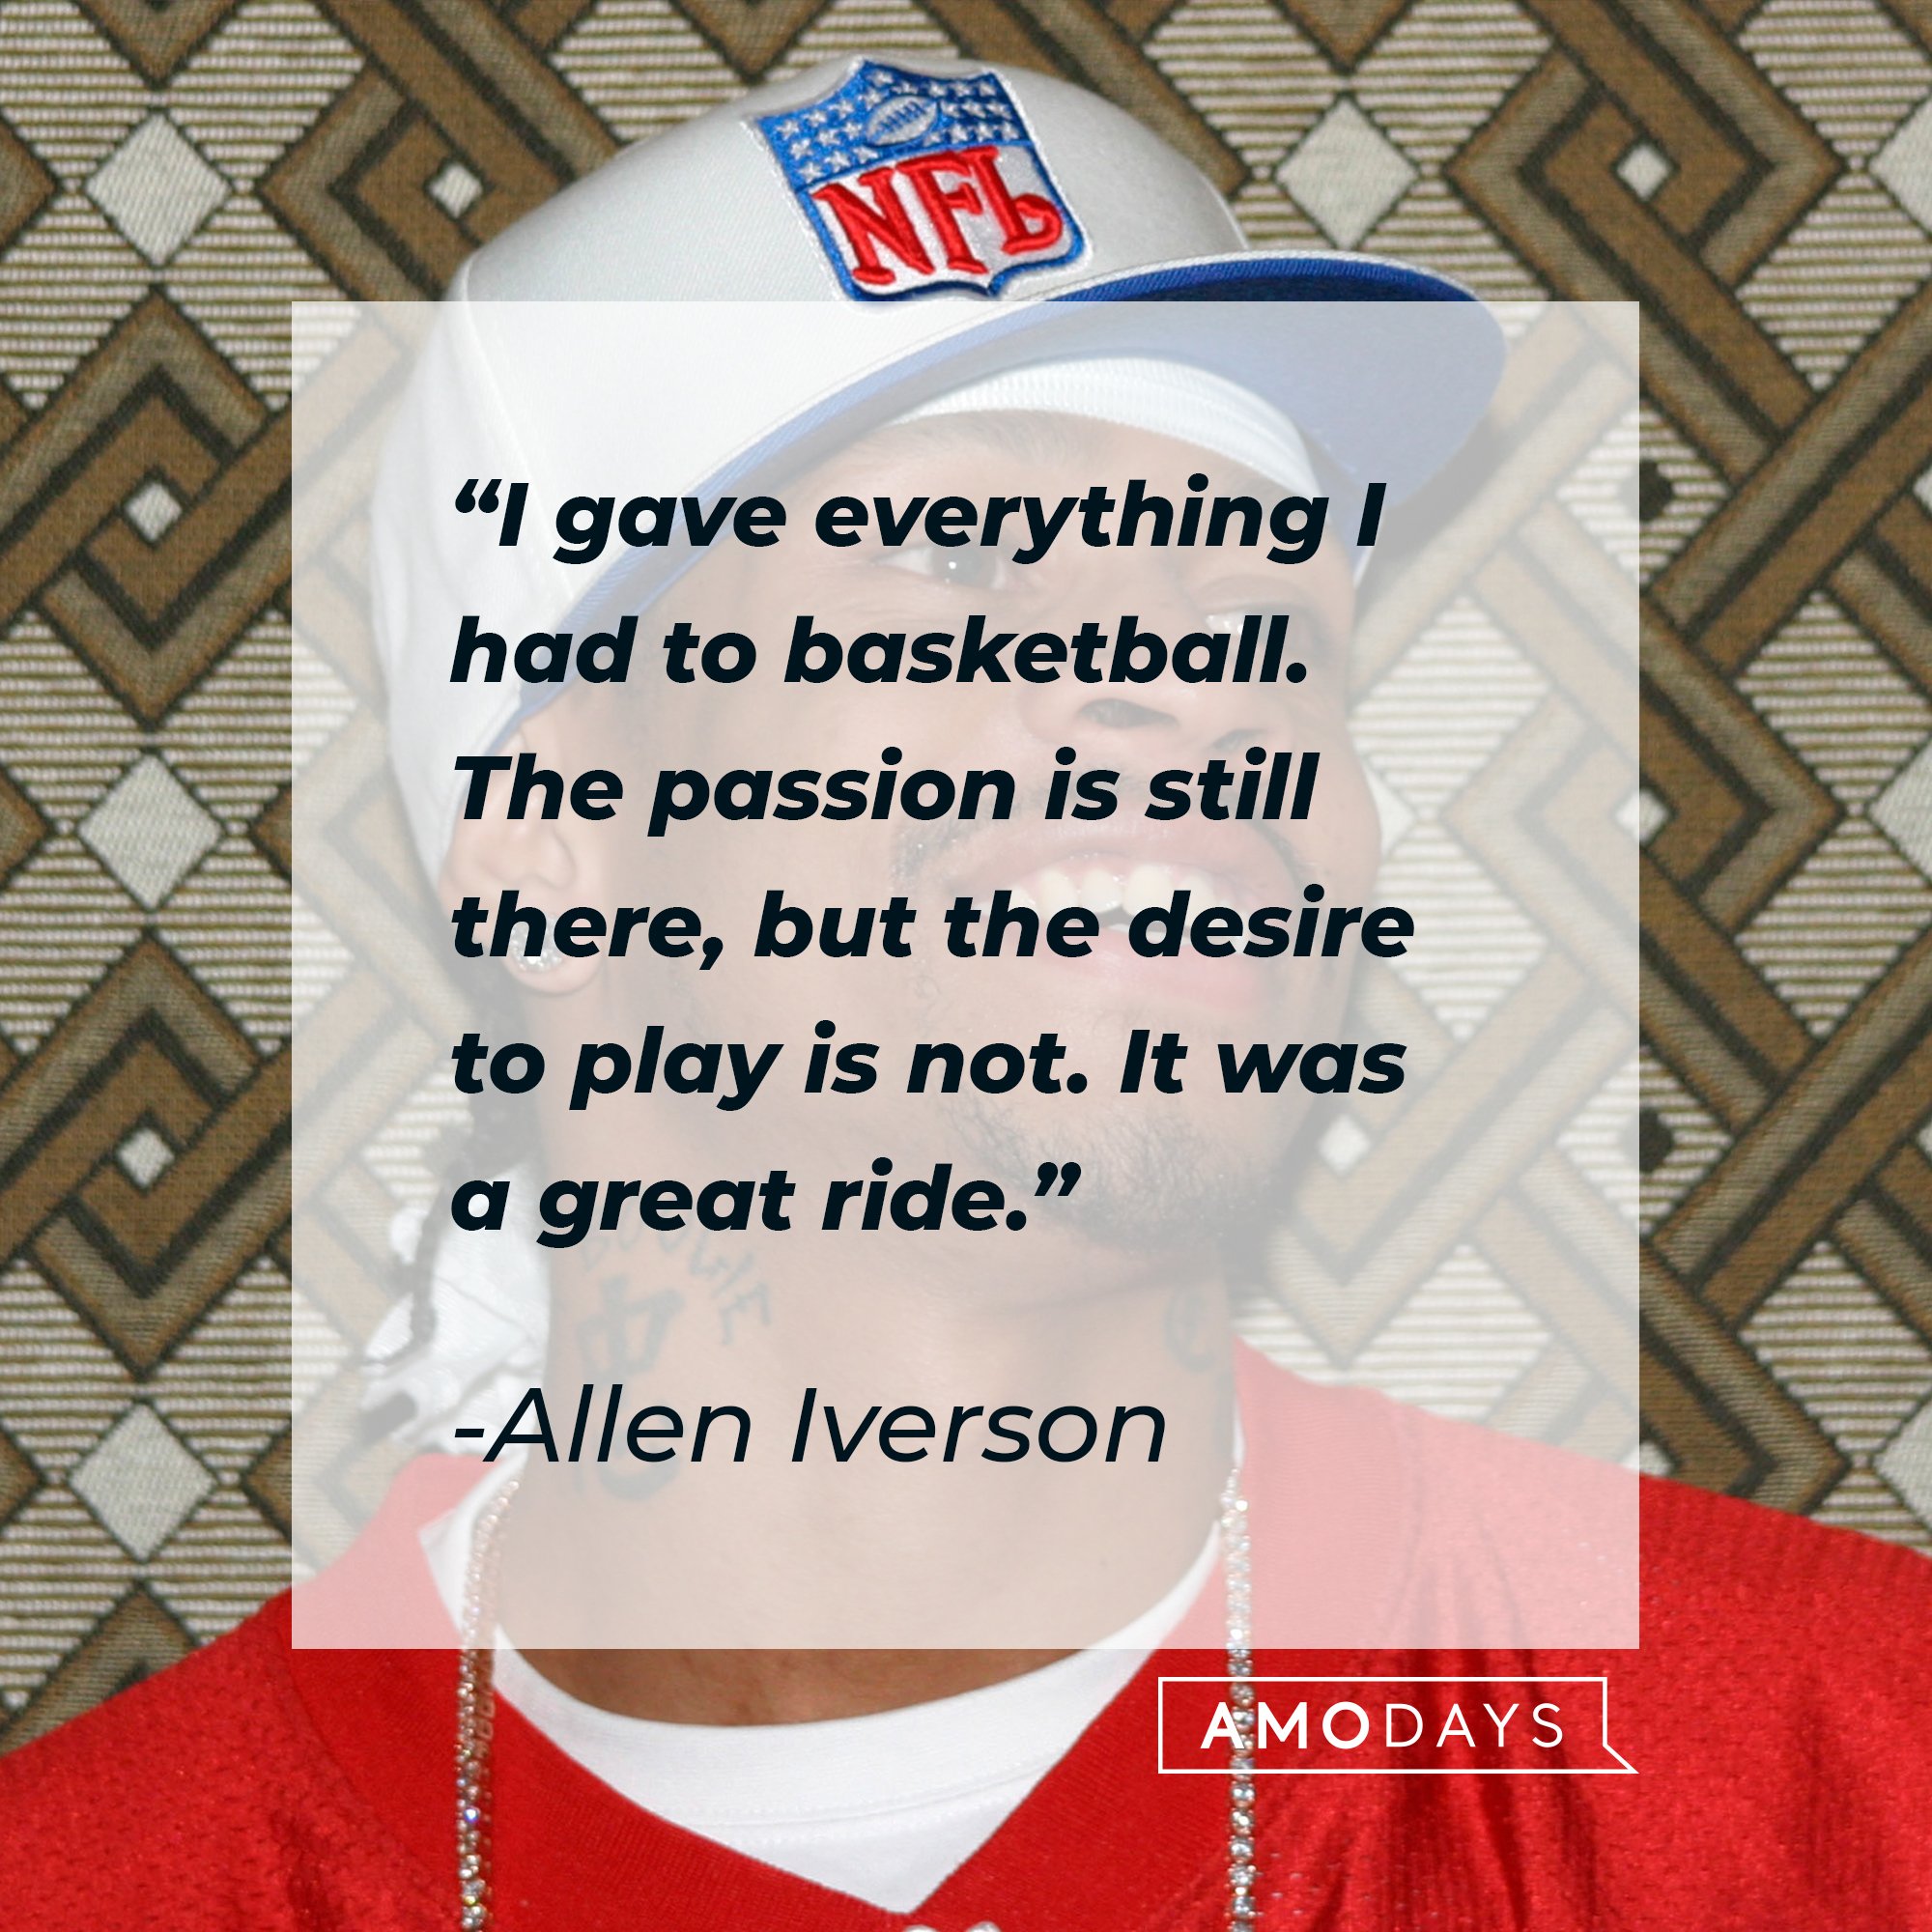 Allen Iverson's quote: "I gave everything I had to basketball. The passion is still there, but the desire to play is not. It was a great ride." | Image: AmoDays